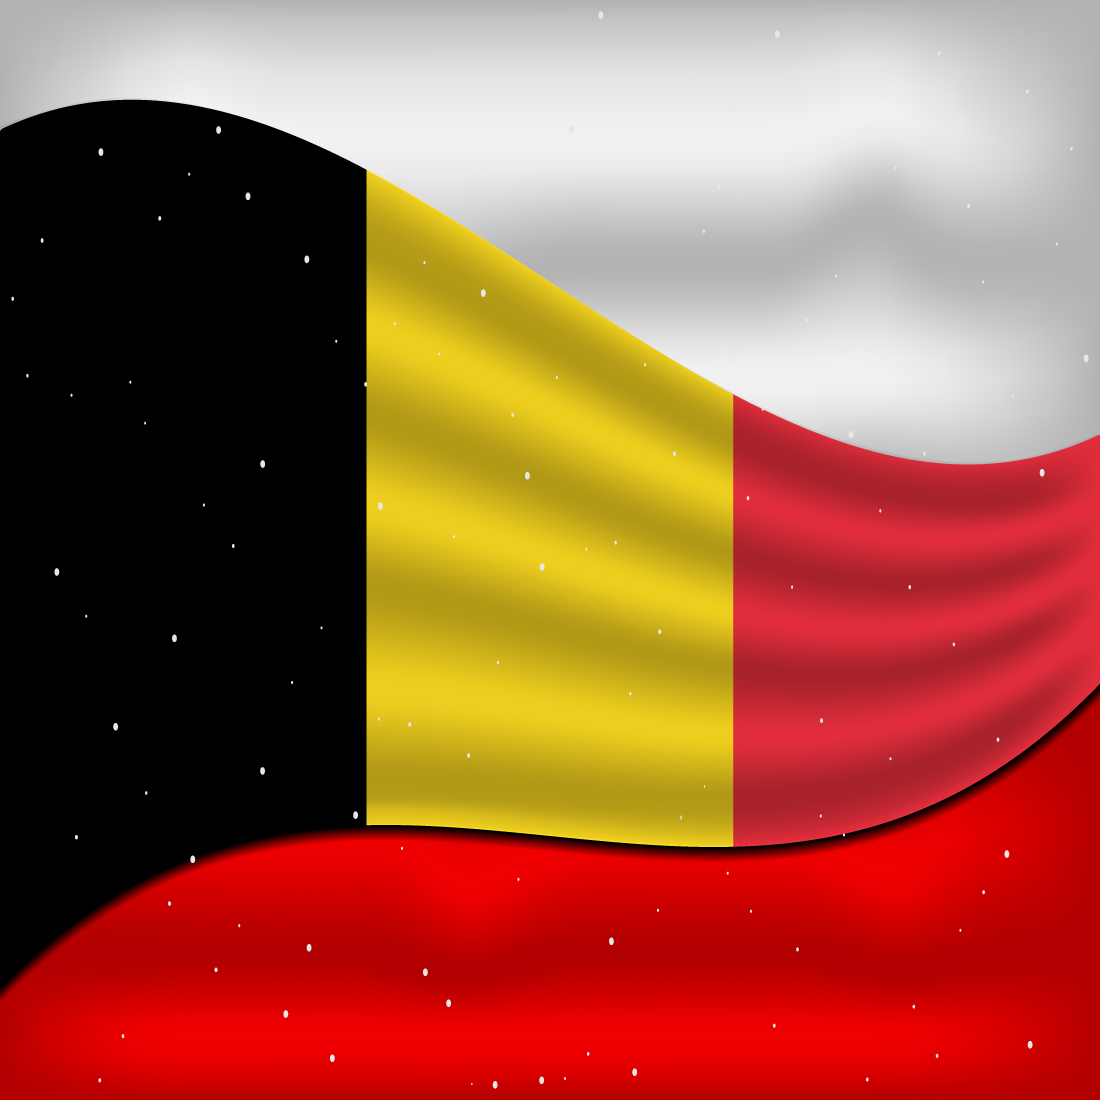 Irresistible image of the flag of Belgium.